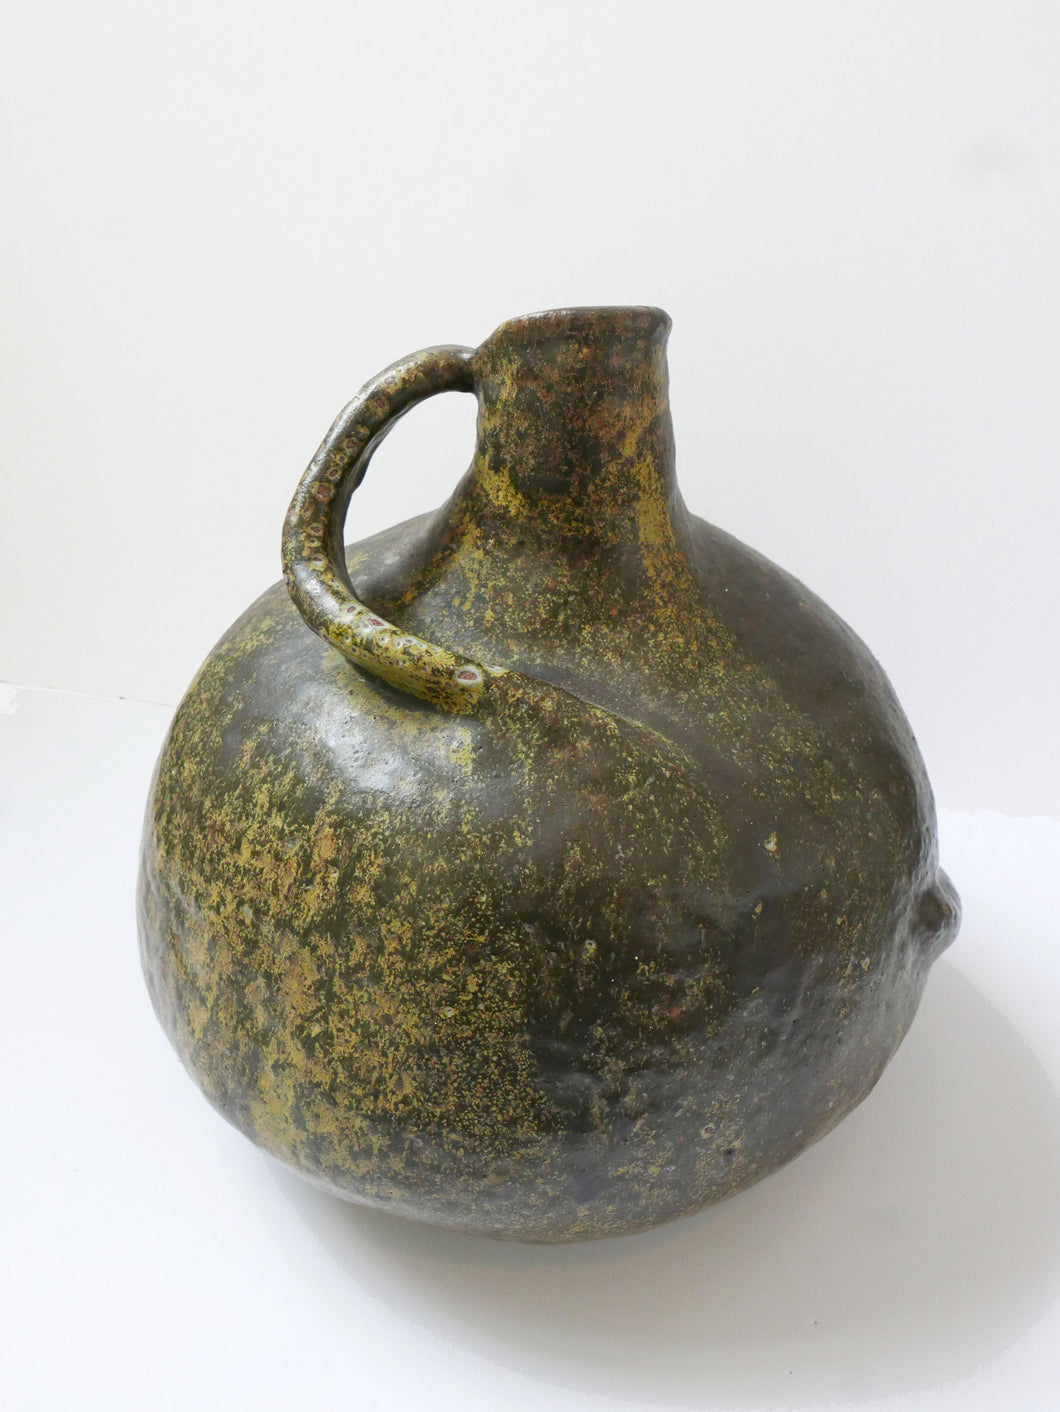 Vintage Stoneware Water Jug for sale. Urn like shape  with abstract detailed handle and a mottled matt glaze with . 